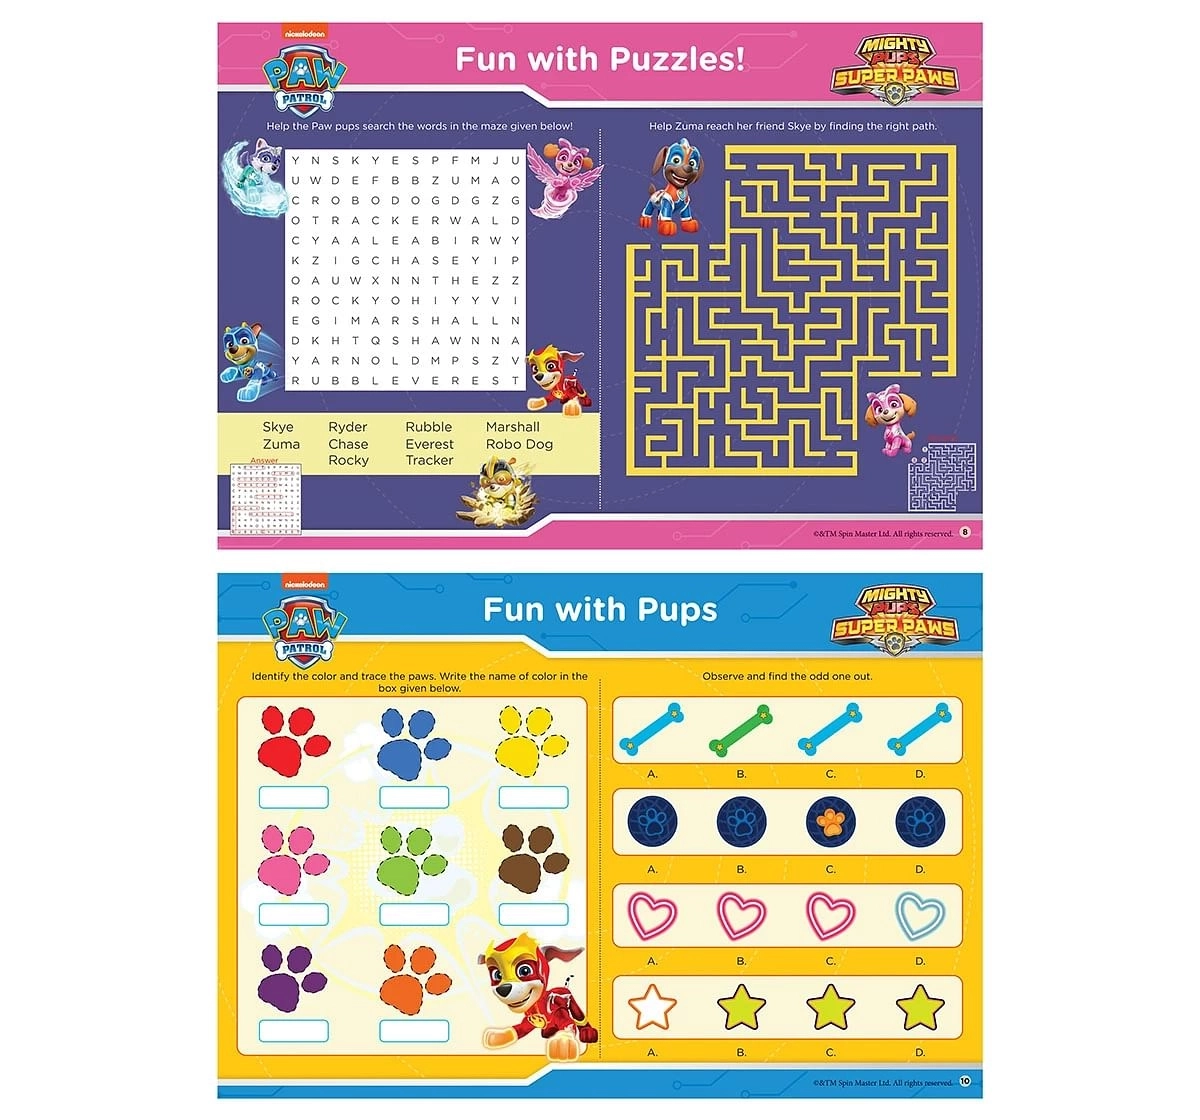 Wonder House Books Nickelodeon Paw Patrol Super Paws Fun Learning  Activity Set With Wipe and Clean for kids 3Y+, Multicolour